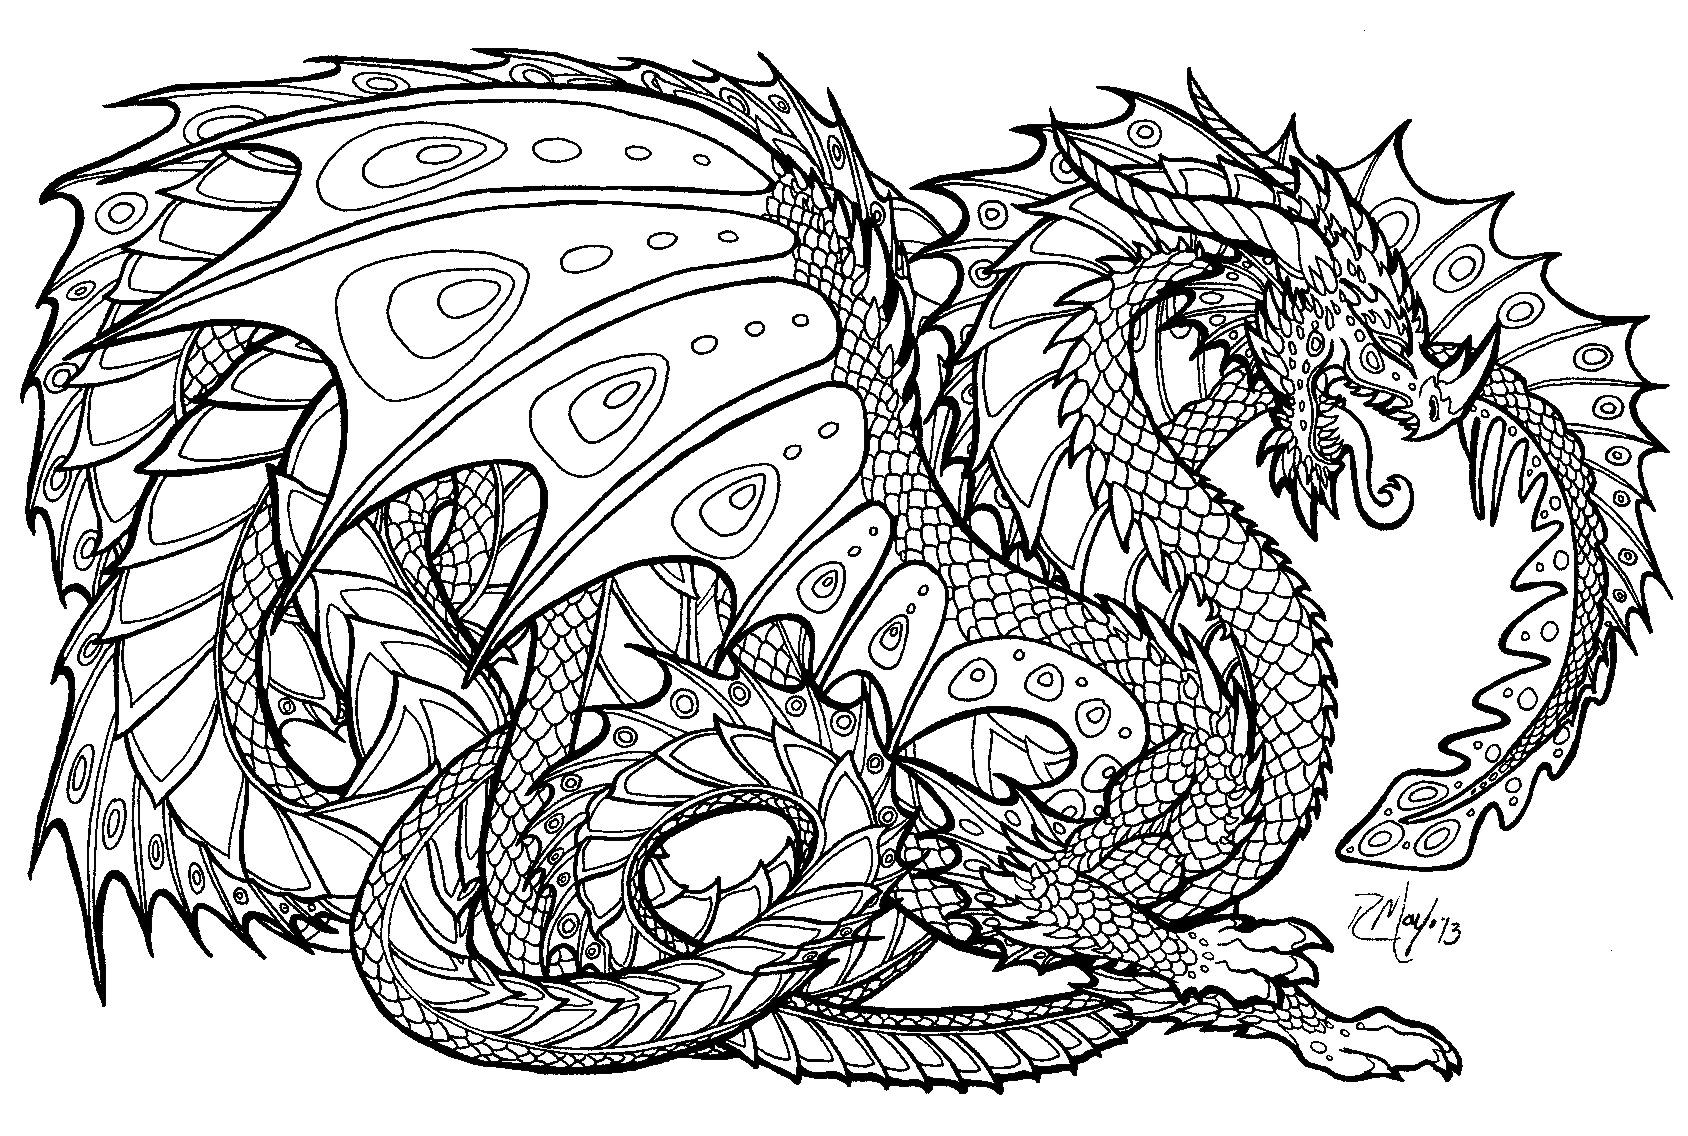 Printable Dragon Coloring Pages
 free printable coloring pages for adults advanced dragons